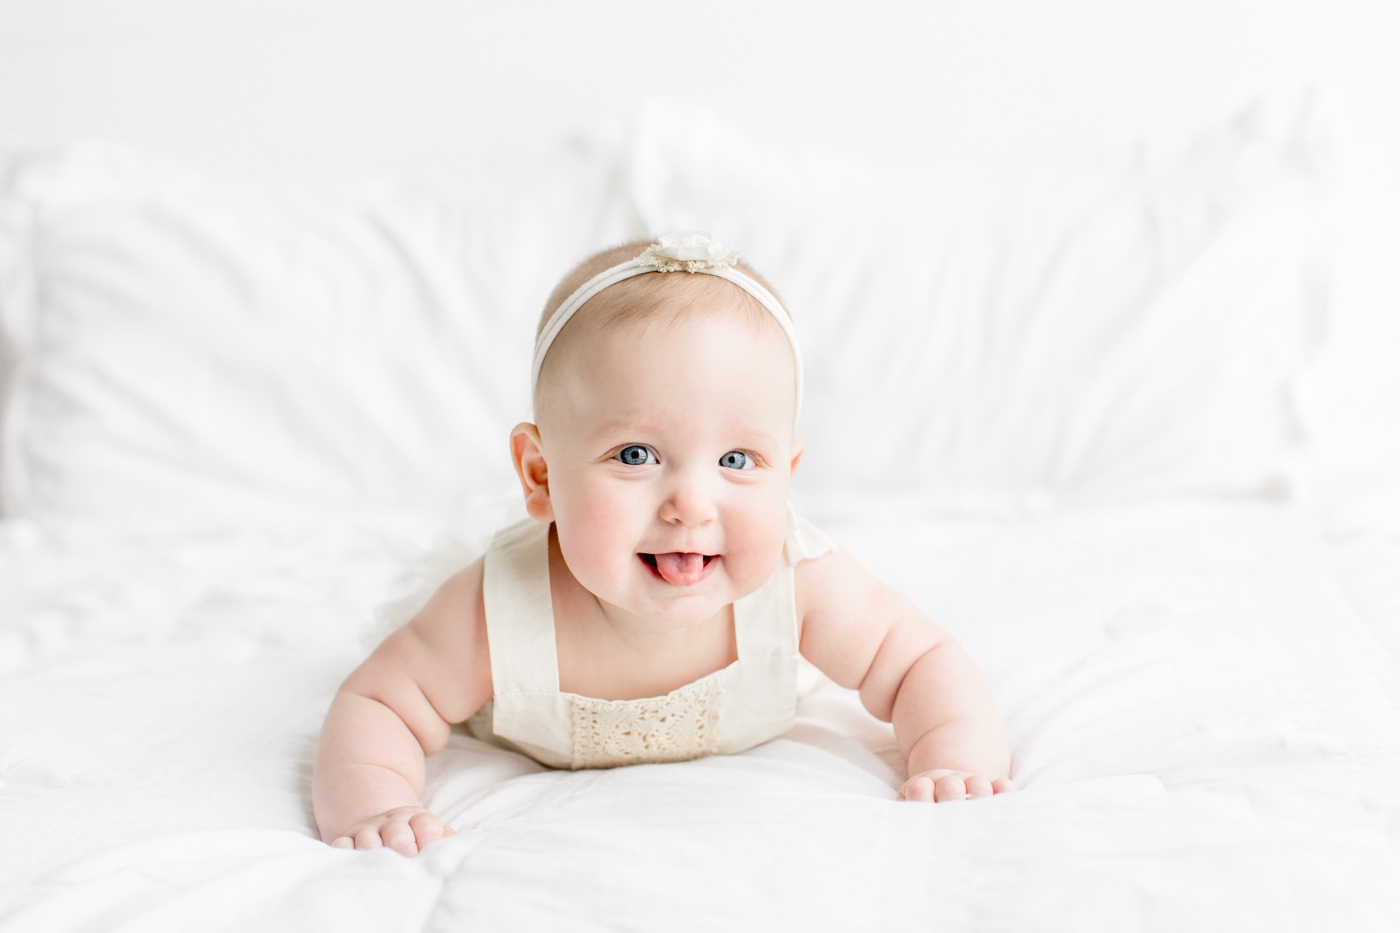 Six month olf baby smiling at camera with her tongue sticking out during sitter milestone session with Austin baby photographer, Sana Ahmed Photography.